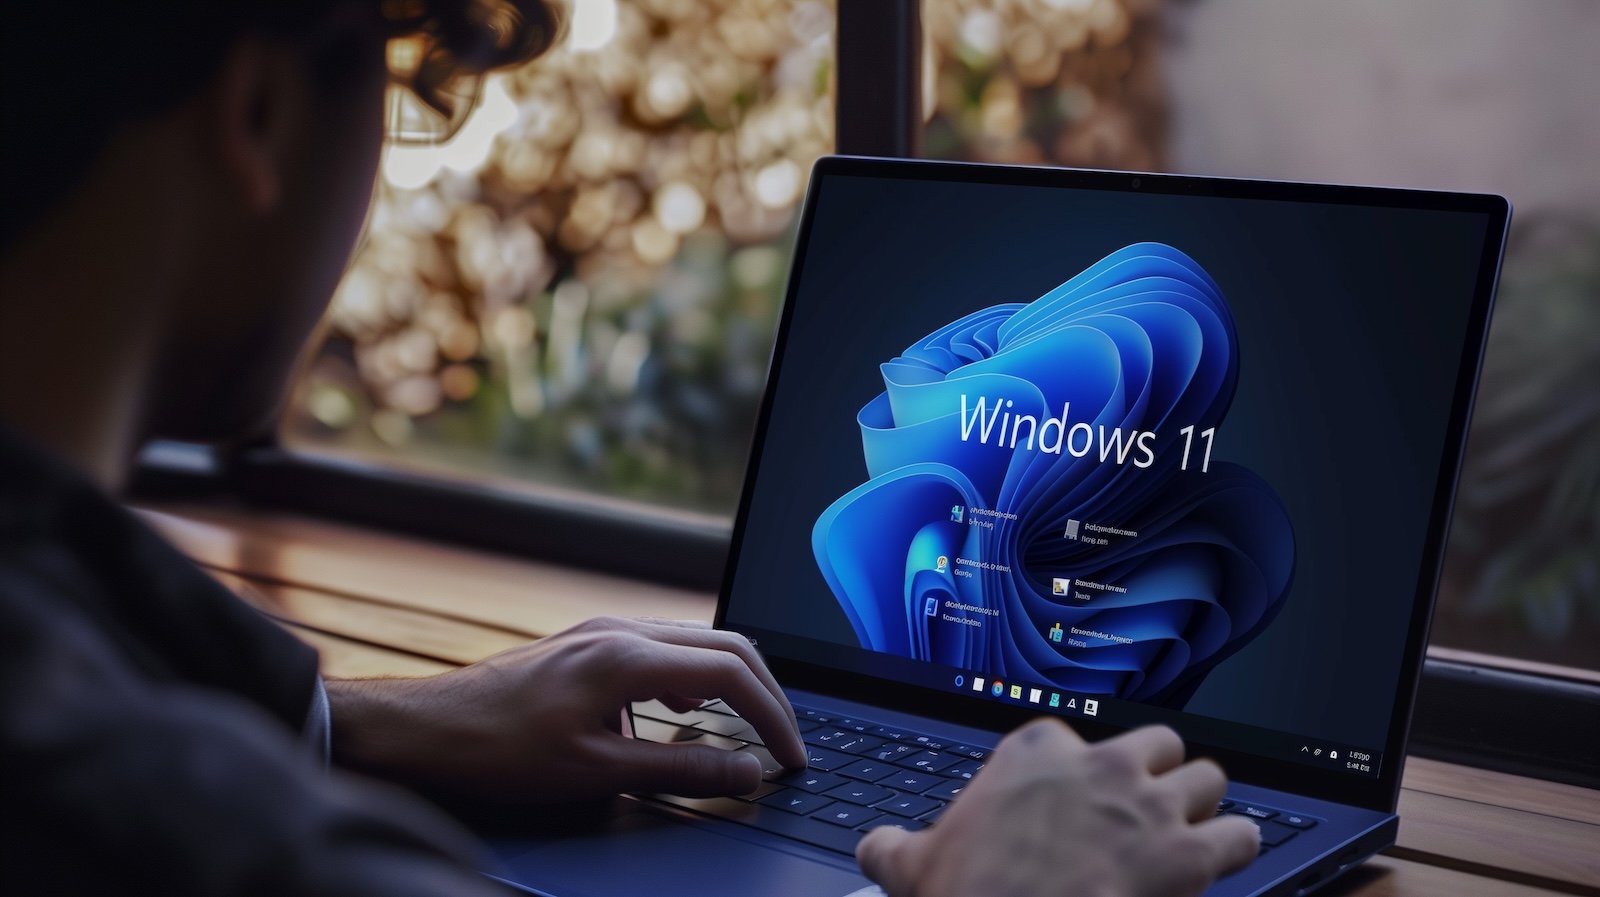 Microsoft now force installing Windows 11 23H2 on eligible PCs